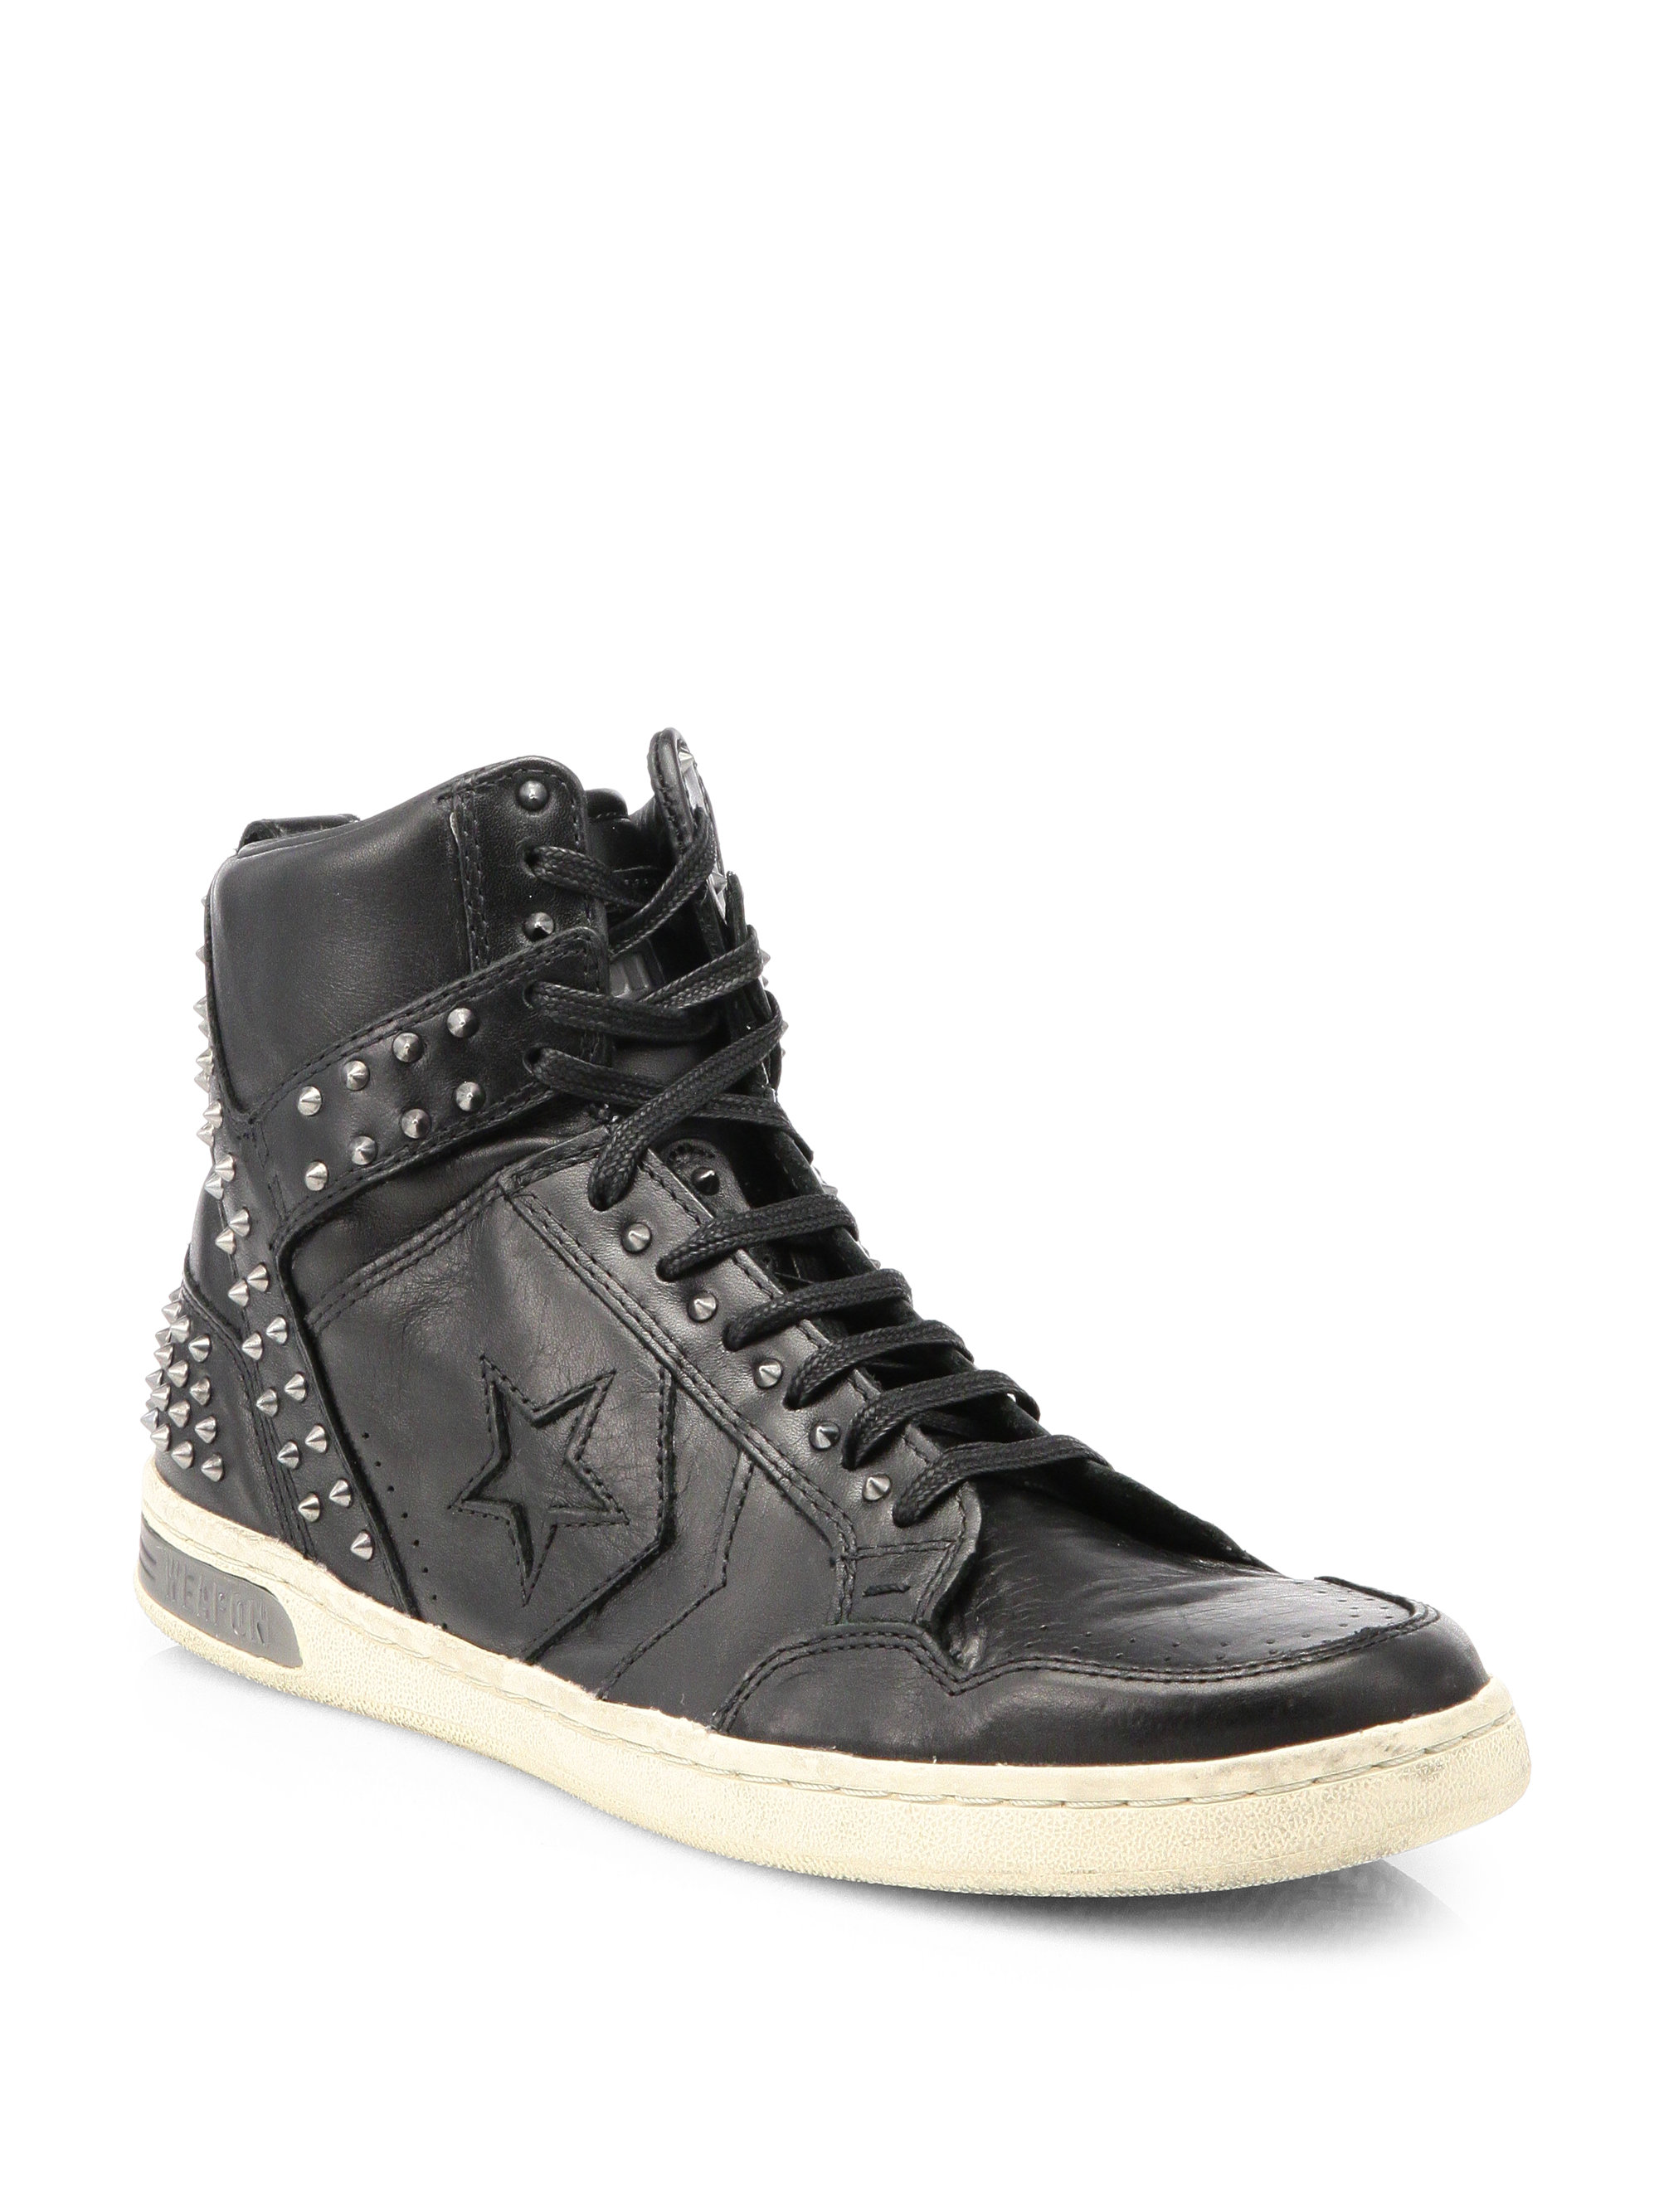 Converse Studded Leather Hightop Sneakers in Black for Men - Lyst